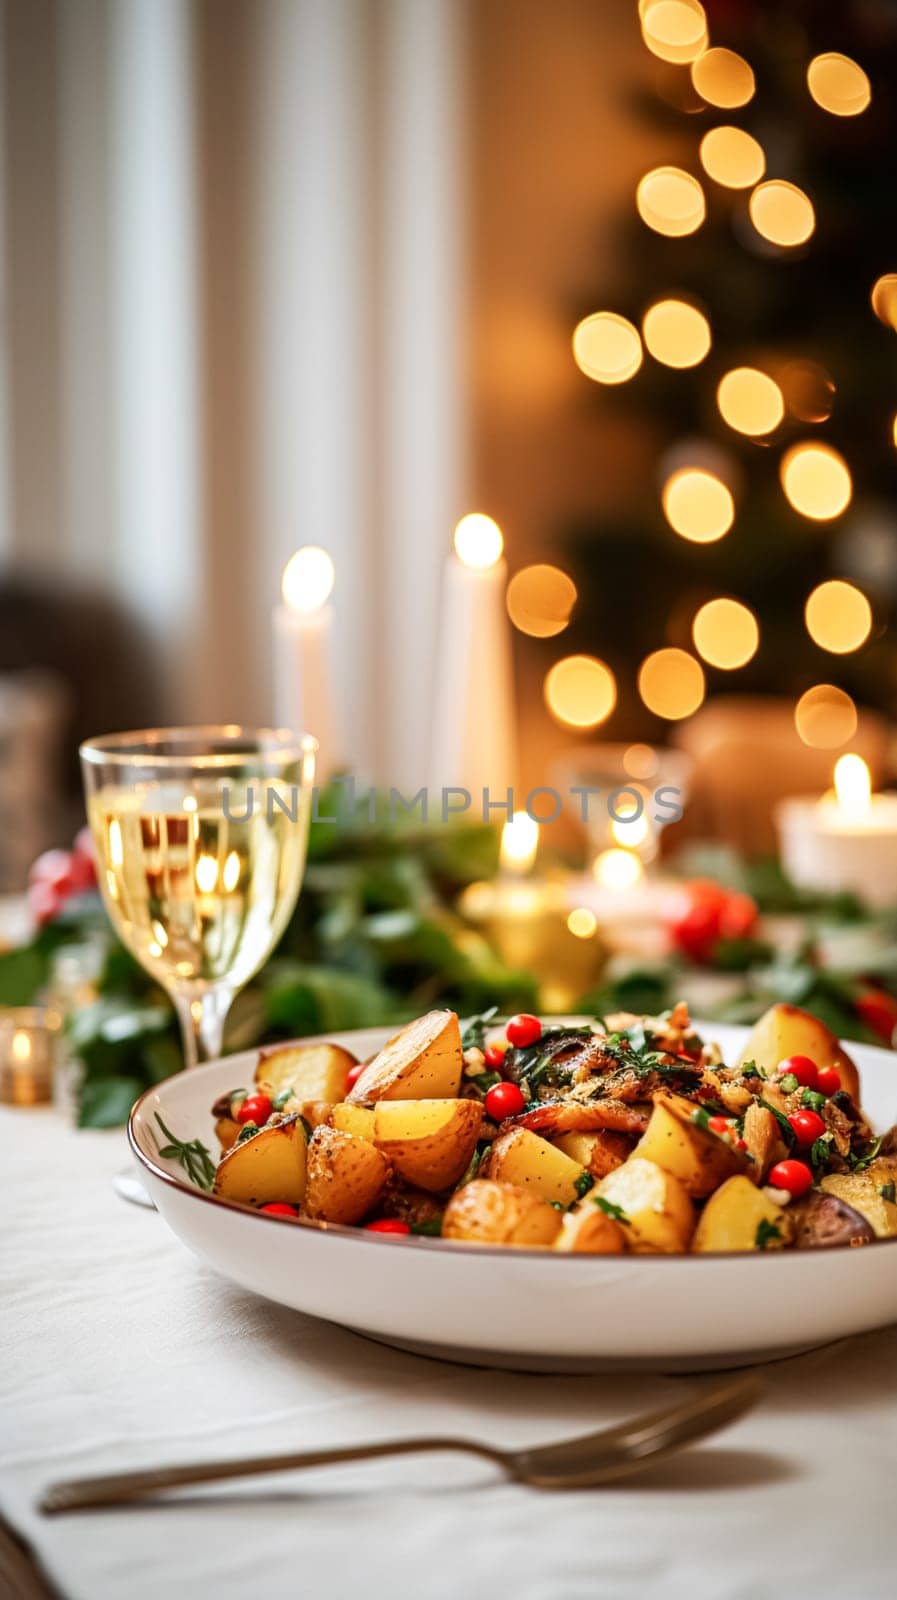 Winter holiday meal for dinner celebration menu, main course festive dish for Christmas, family event, New Year and holidays, English country food recipe idea